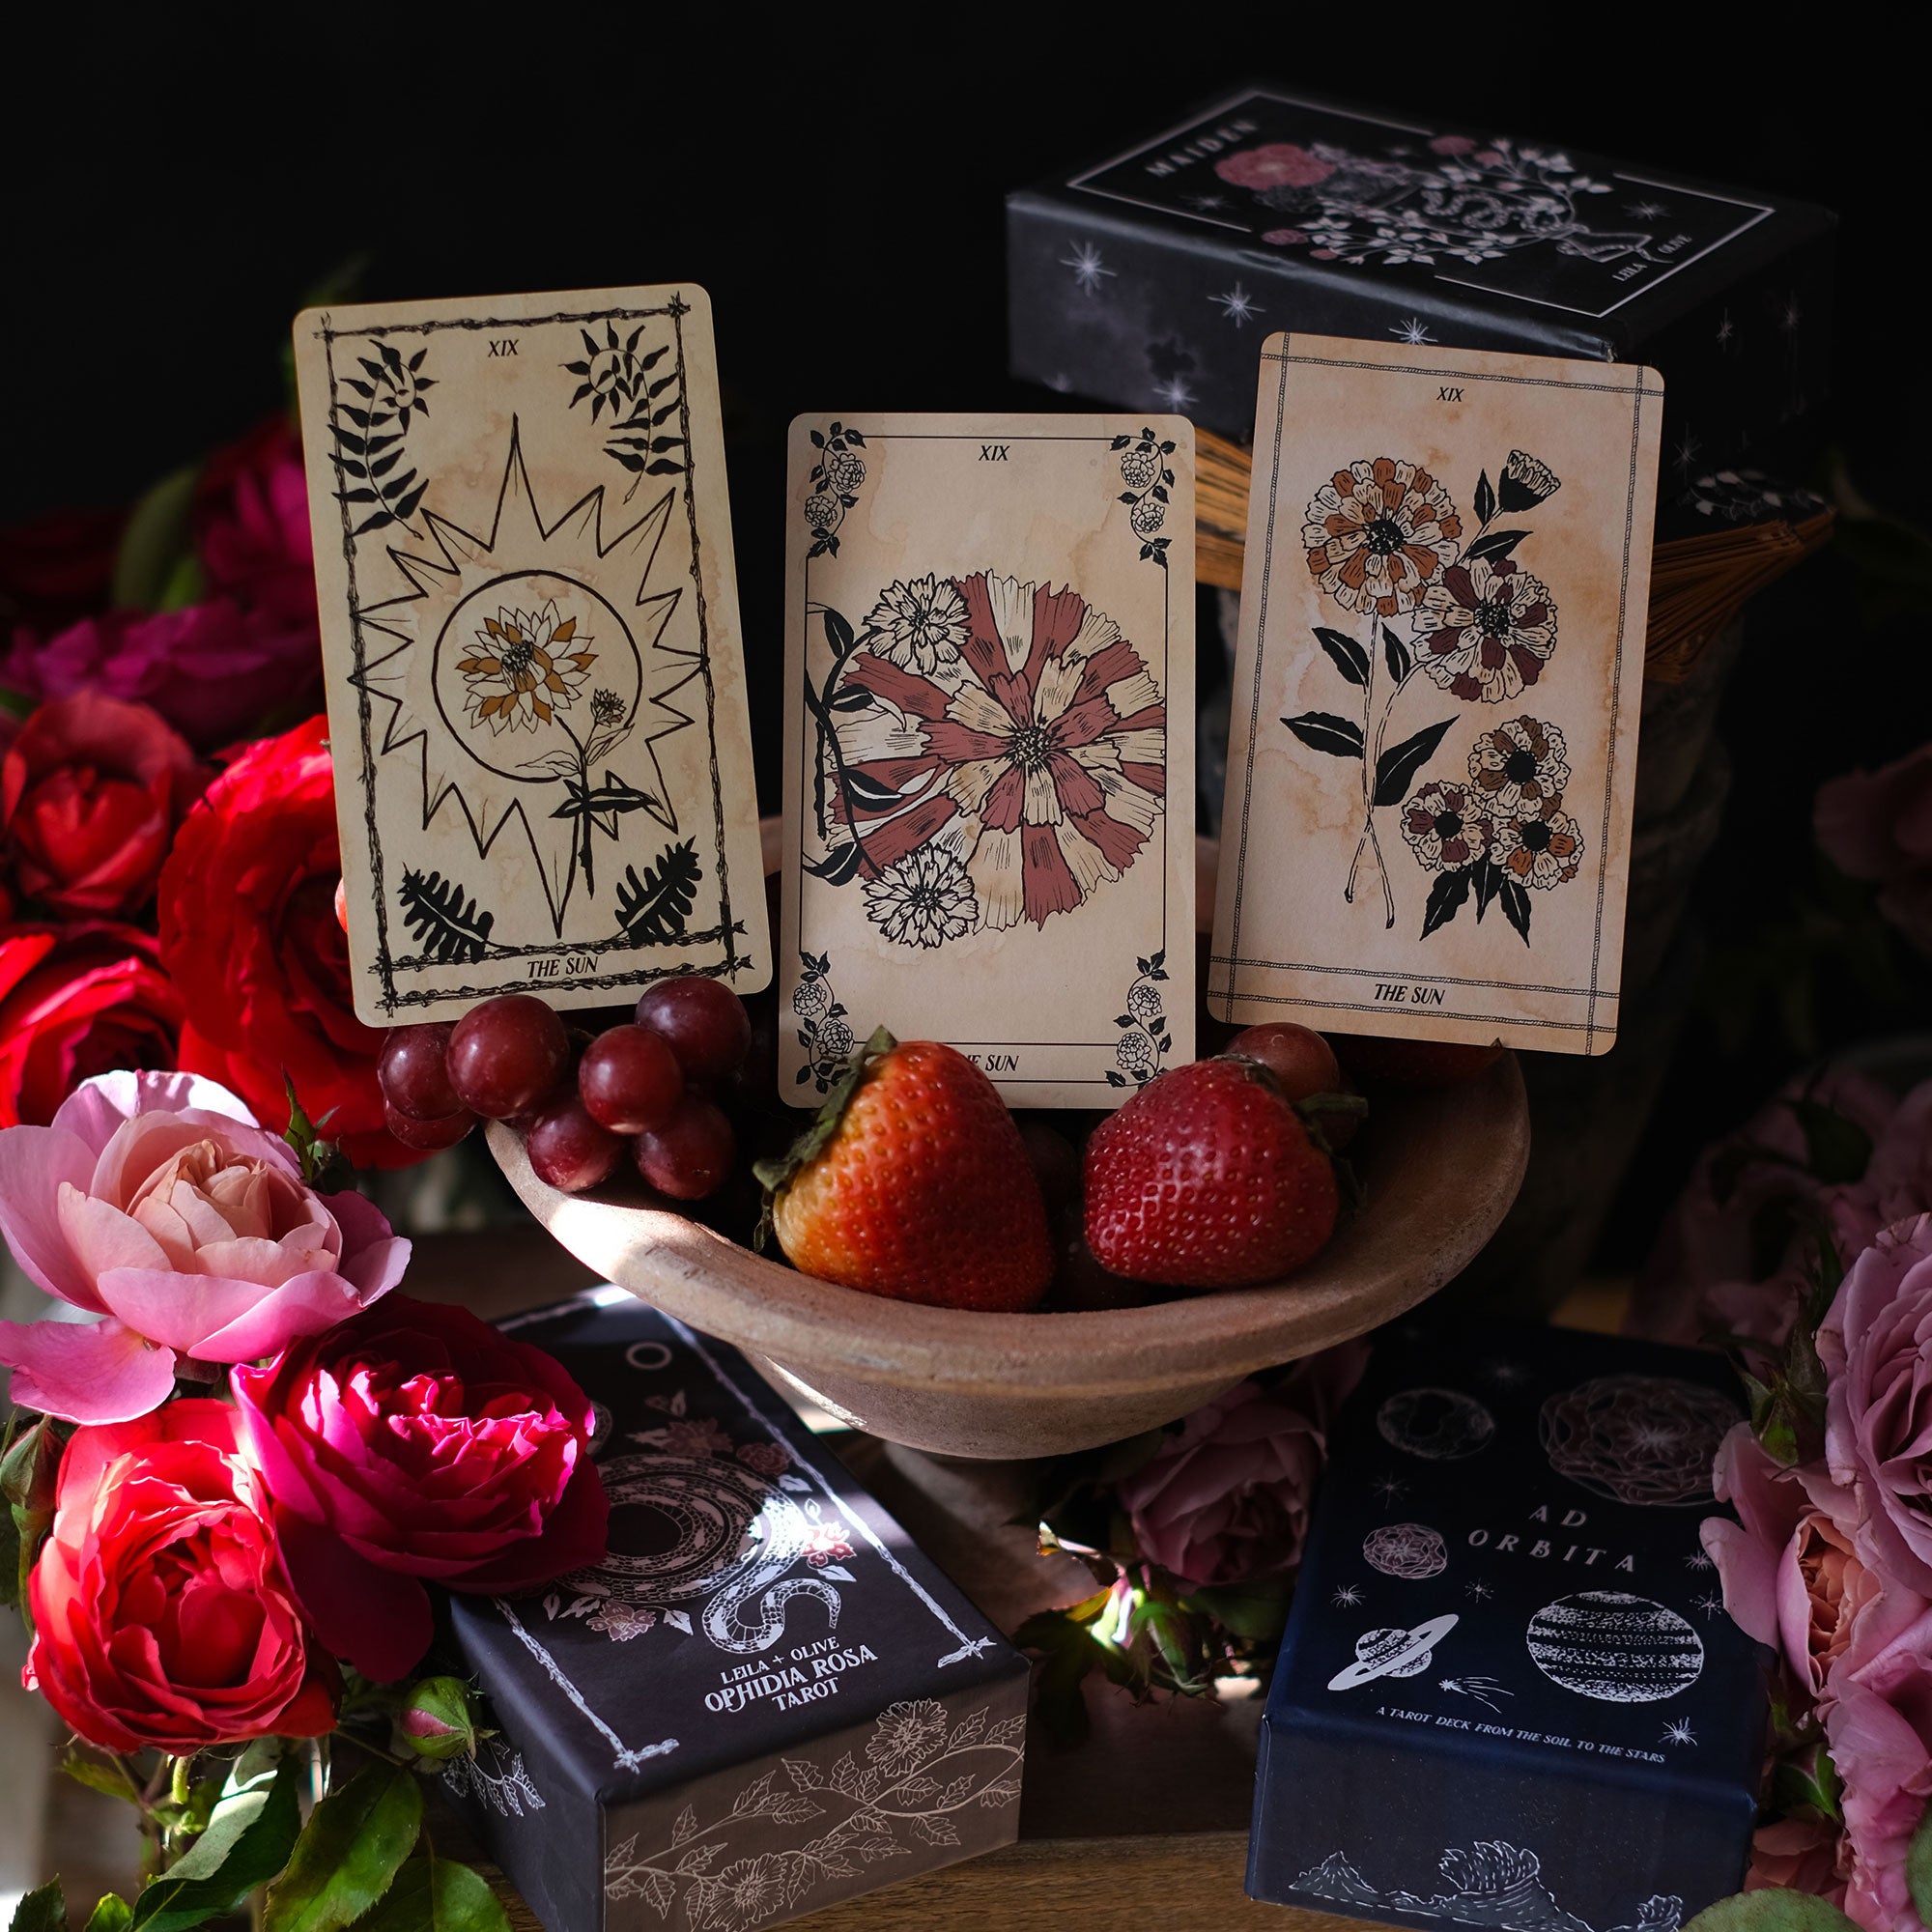 Pythia Botanica is the original Botanical Oracle deck, illustrated by hand and rooted in Greek mythology and plant magic. Read these cards in traditional Tarot spreads and allow the spirit of these plants to guide you. 